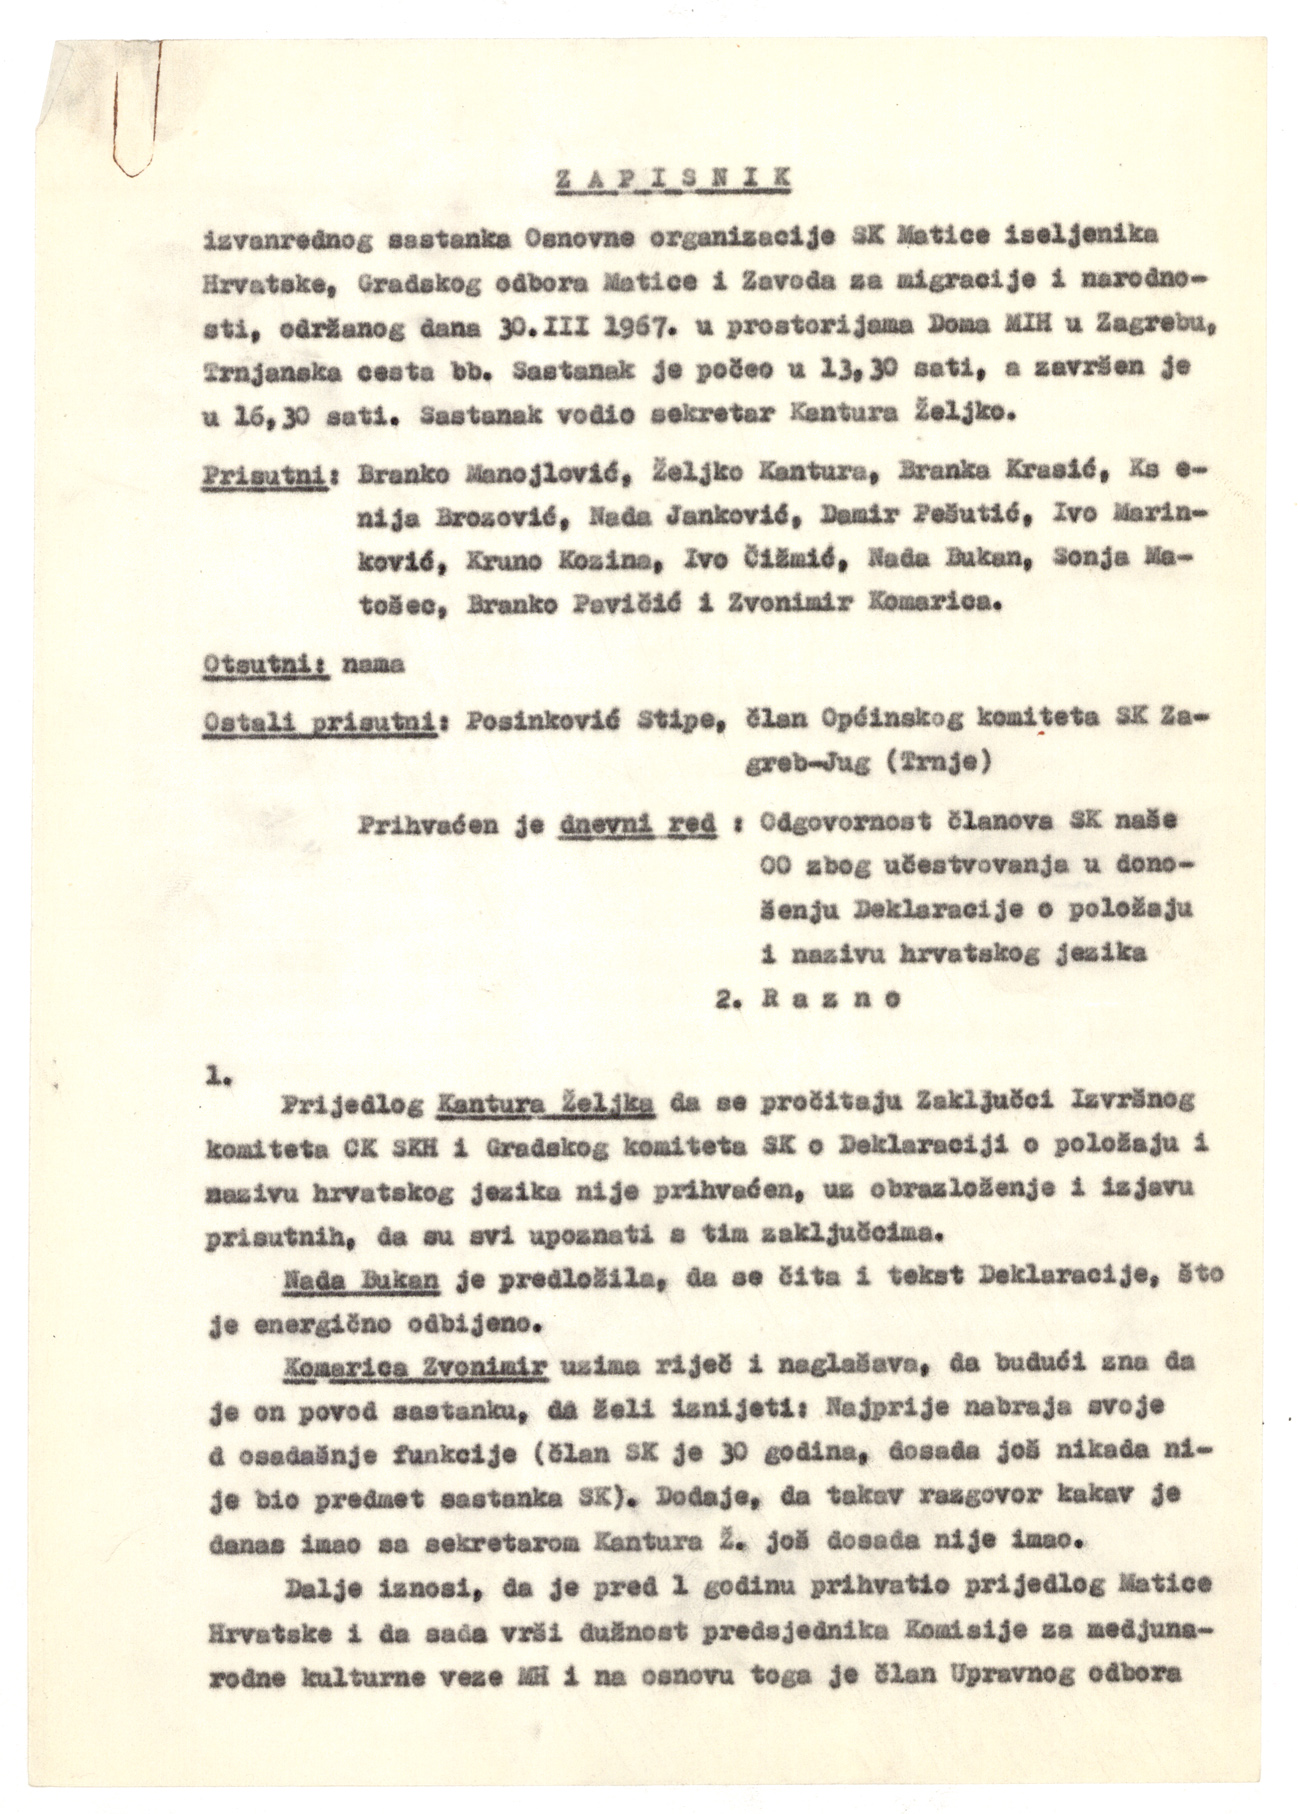 The first page of the minutes.